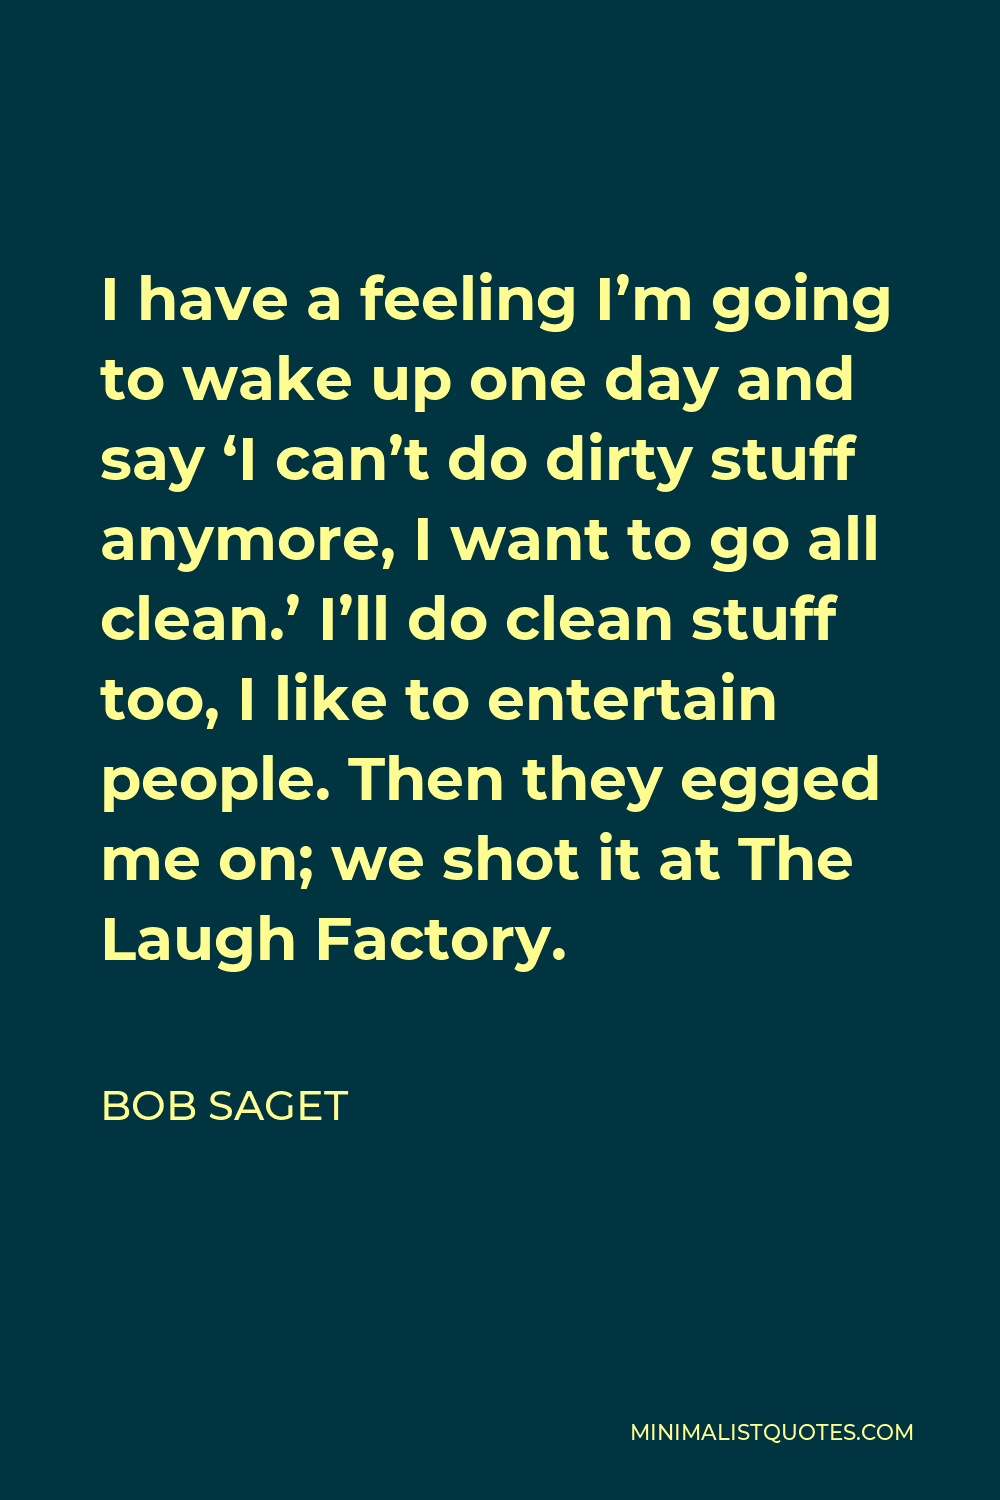 Bob Saget Quote - I have a feeling I’m going to wake up one day and say ‘I can’t do dirty stuff anymore, I want to go all clean.’ I’ll do clean stuff too, I like to entertain people. Then they egged me on; we shot it at The Laugh Factory.